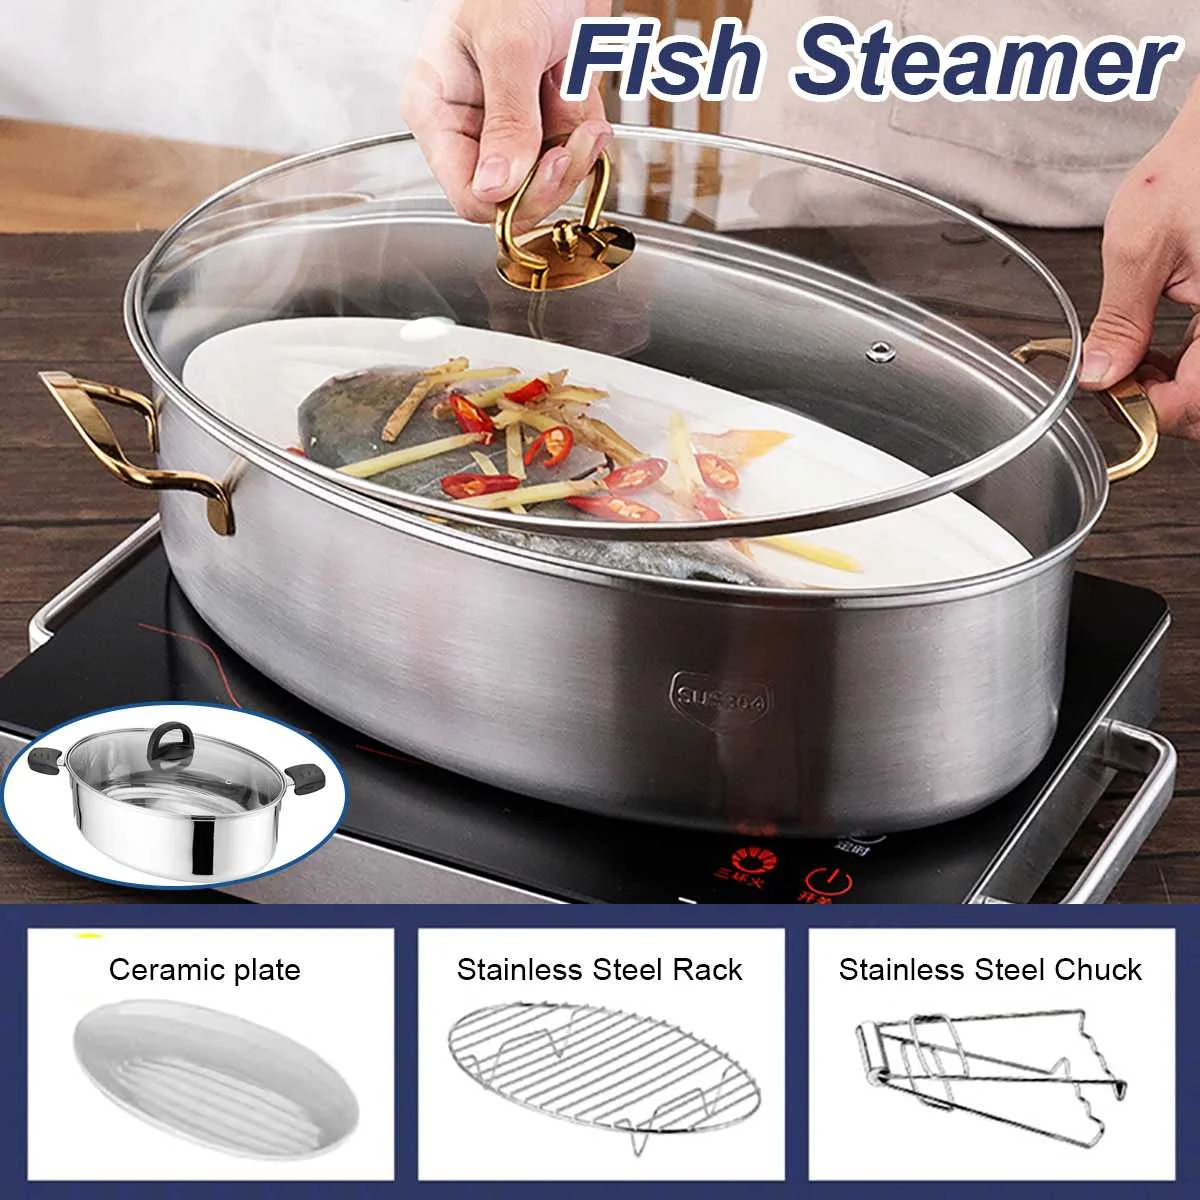 Stainless Steel Fish Steamer Multi-Use Oval Roasting Cookware  Hotpot with Rack Ceramic Pan Chuck Pasta Pot Stockpot